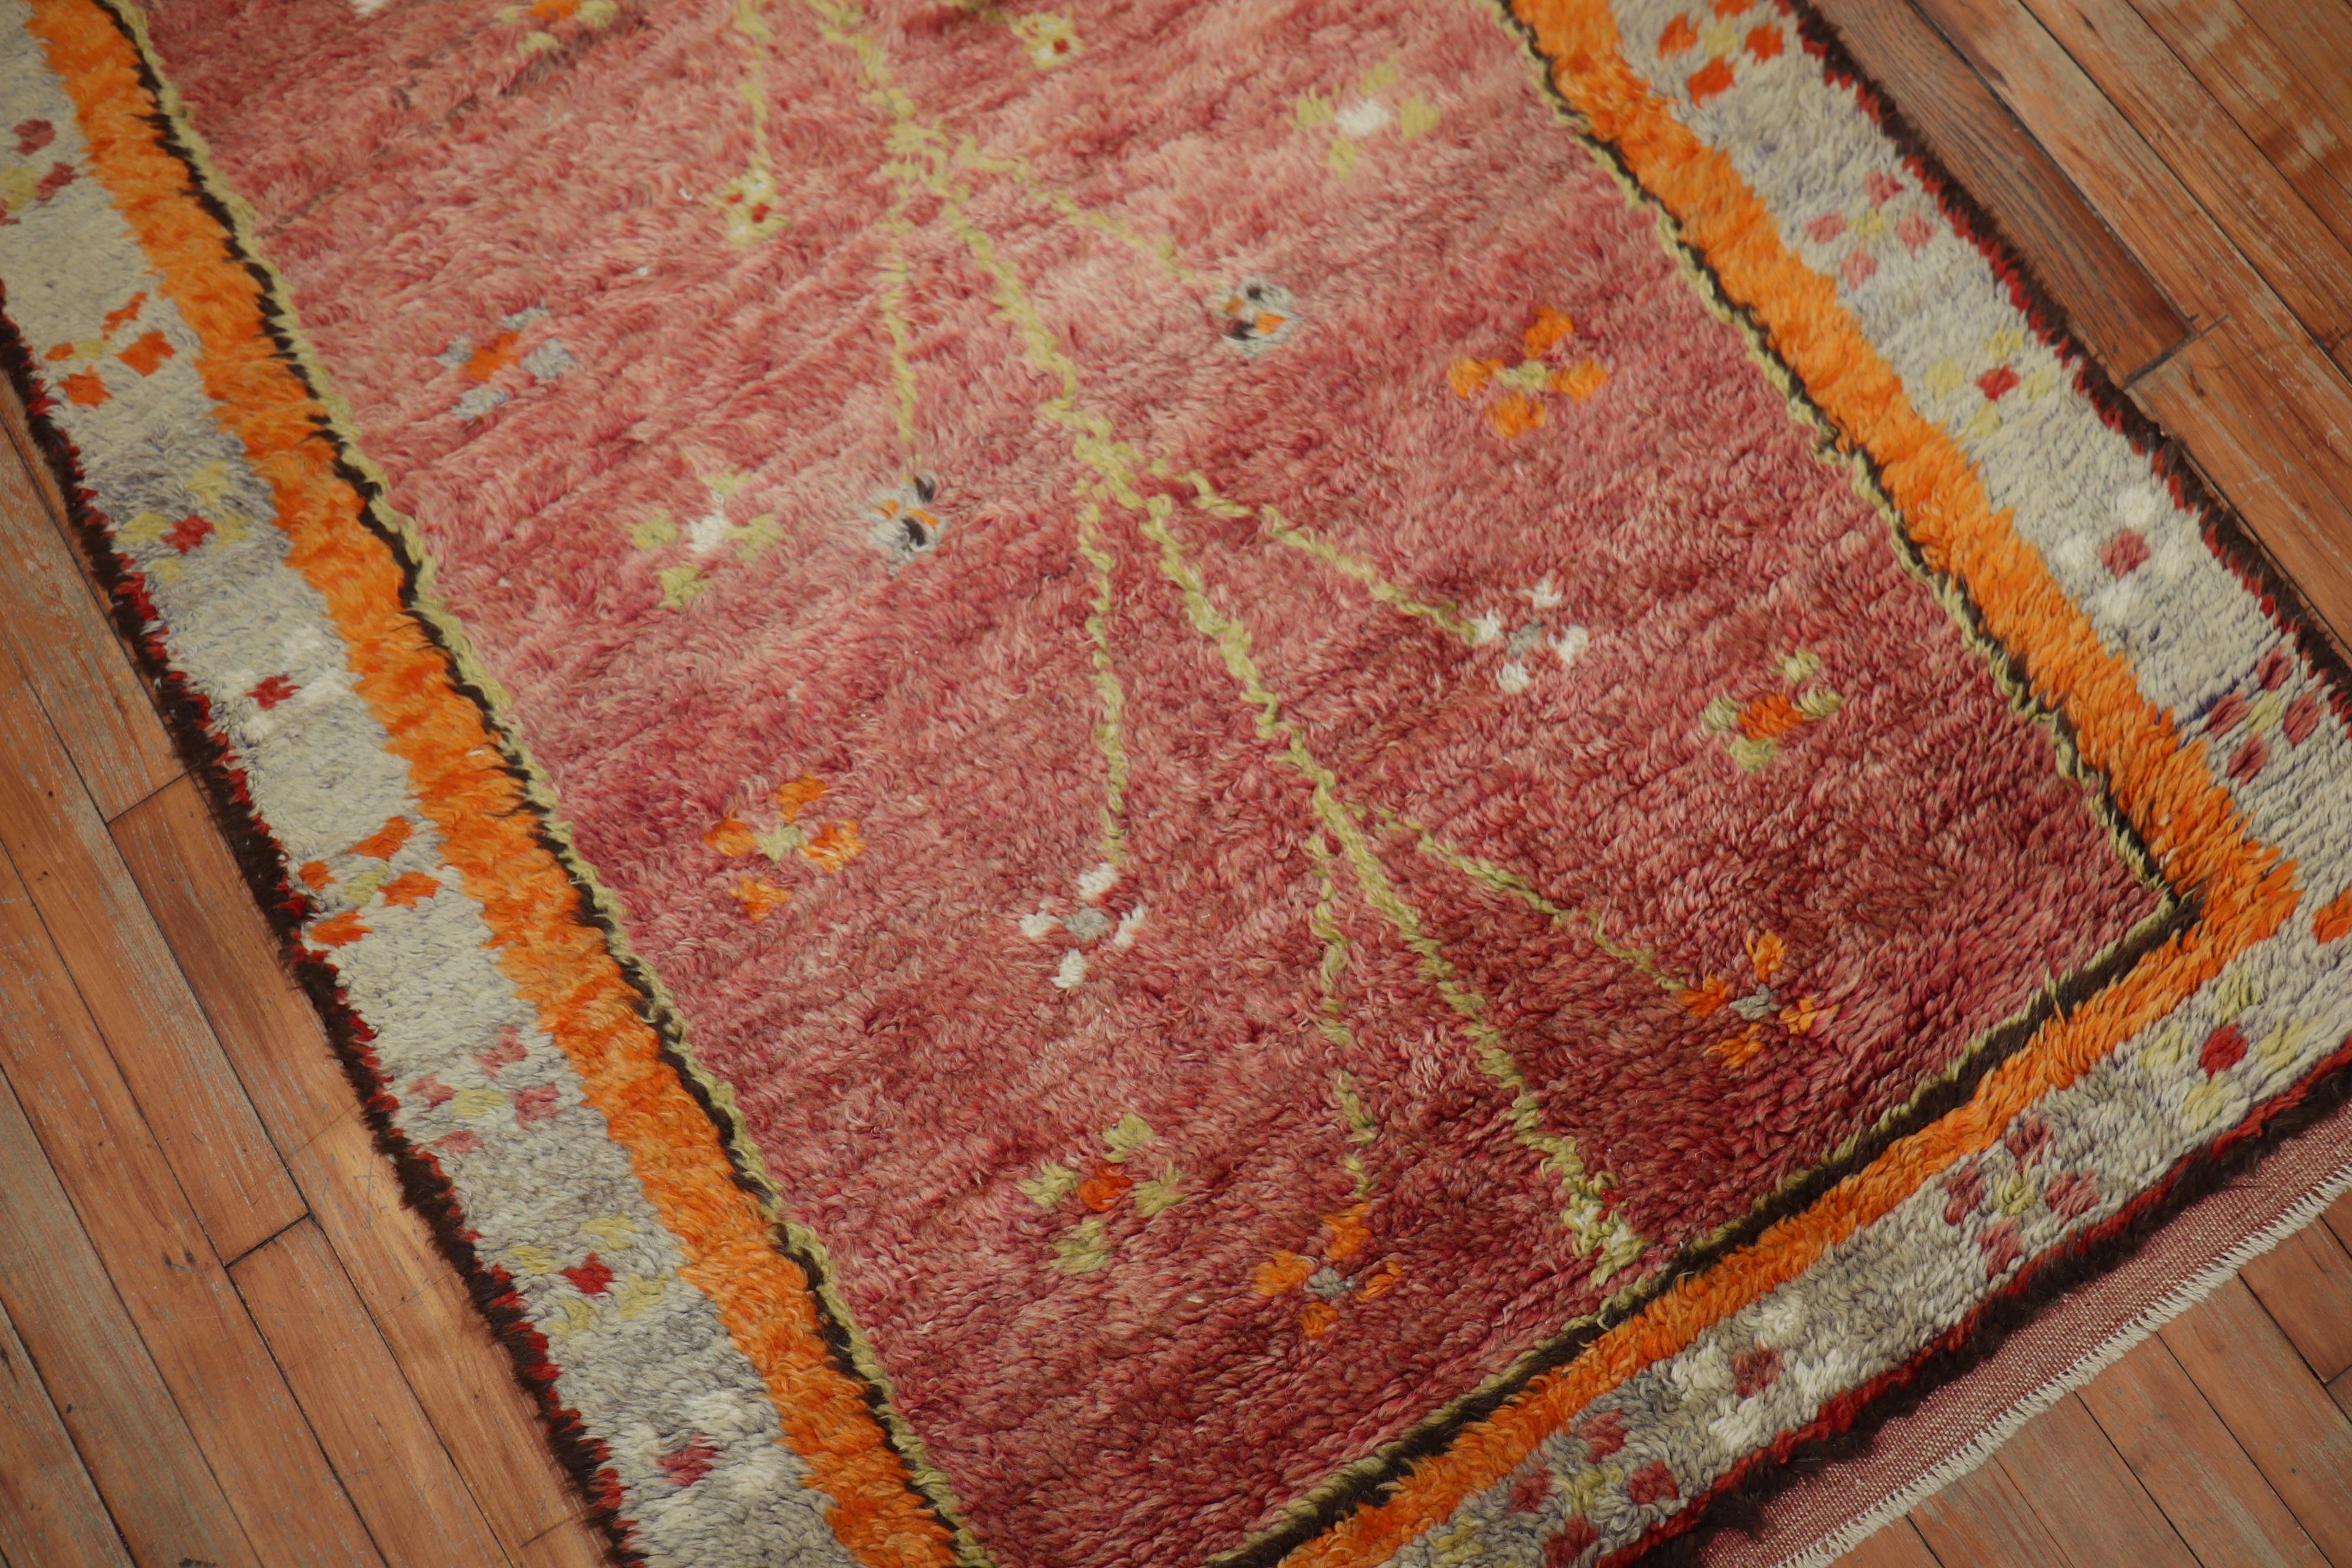 A Turkish Tulu shag rug with a floral design

Measures: 3'7